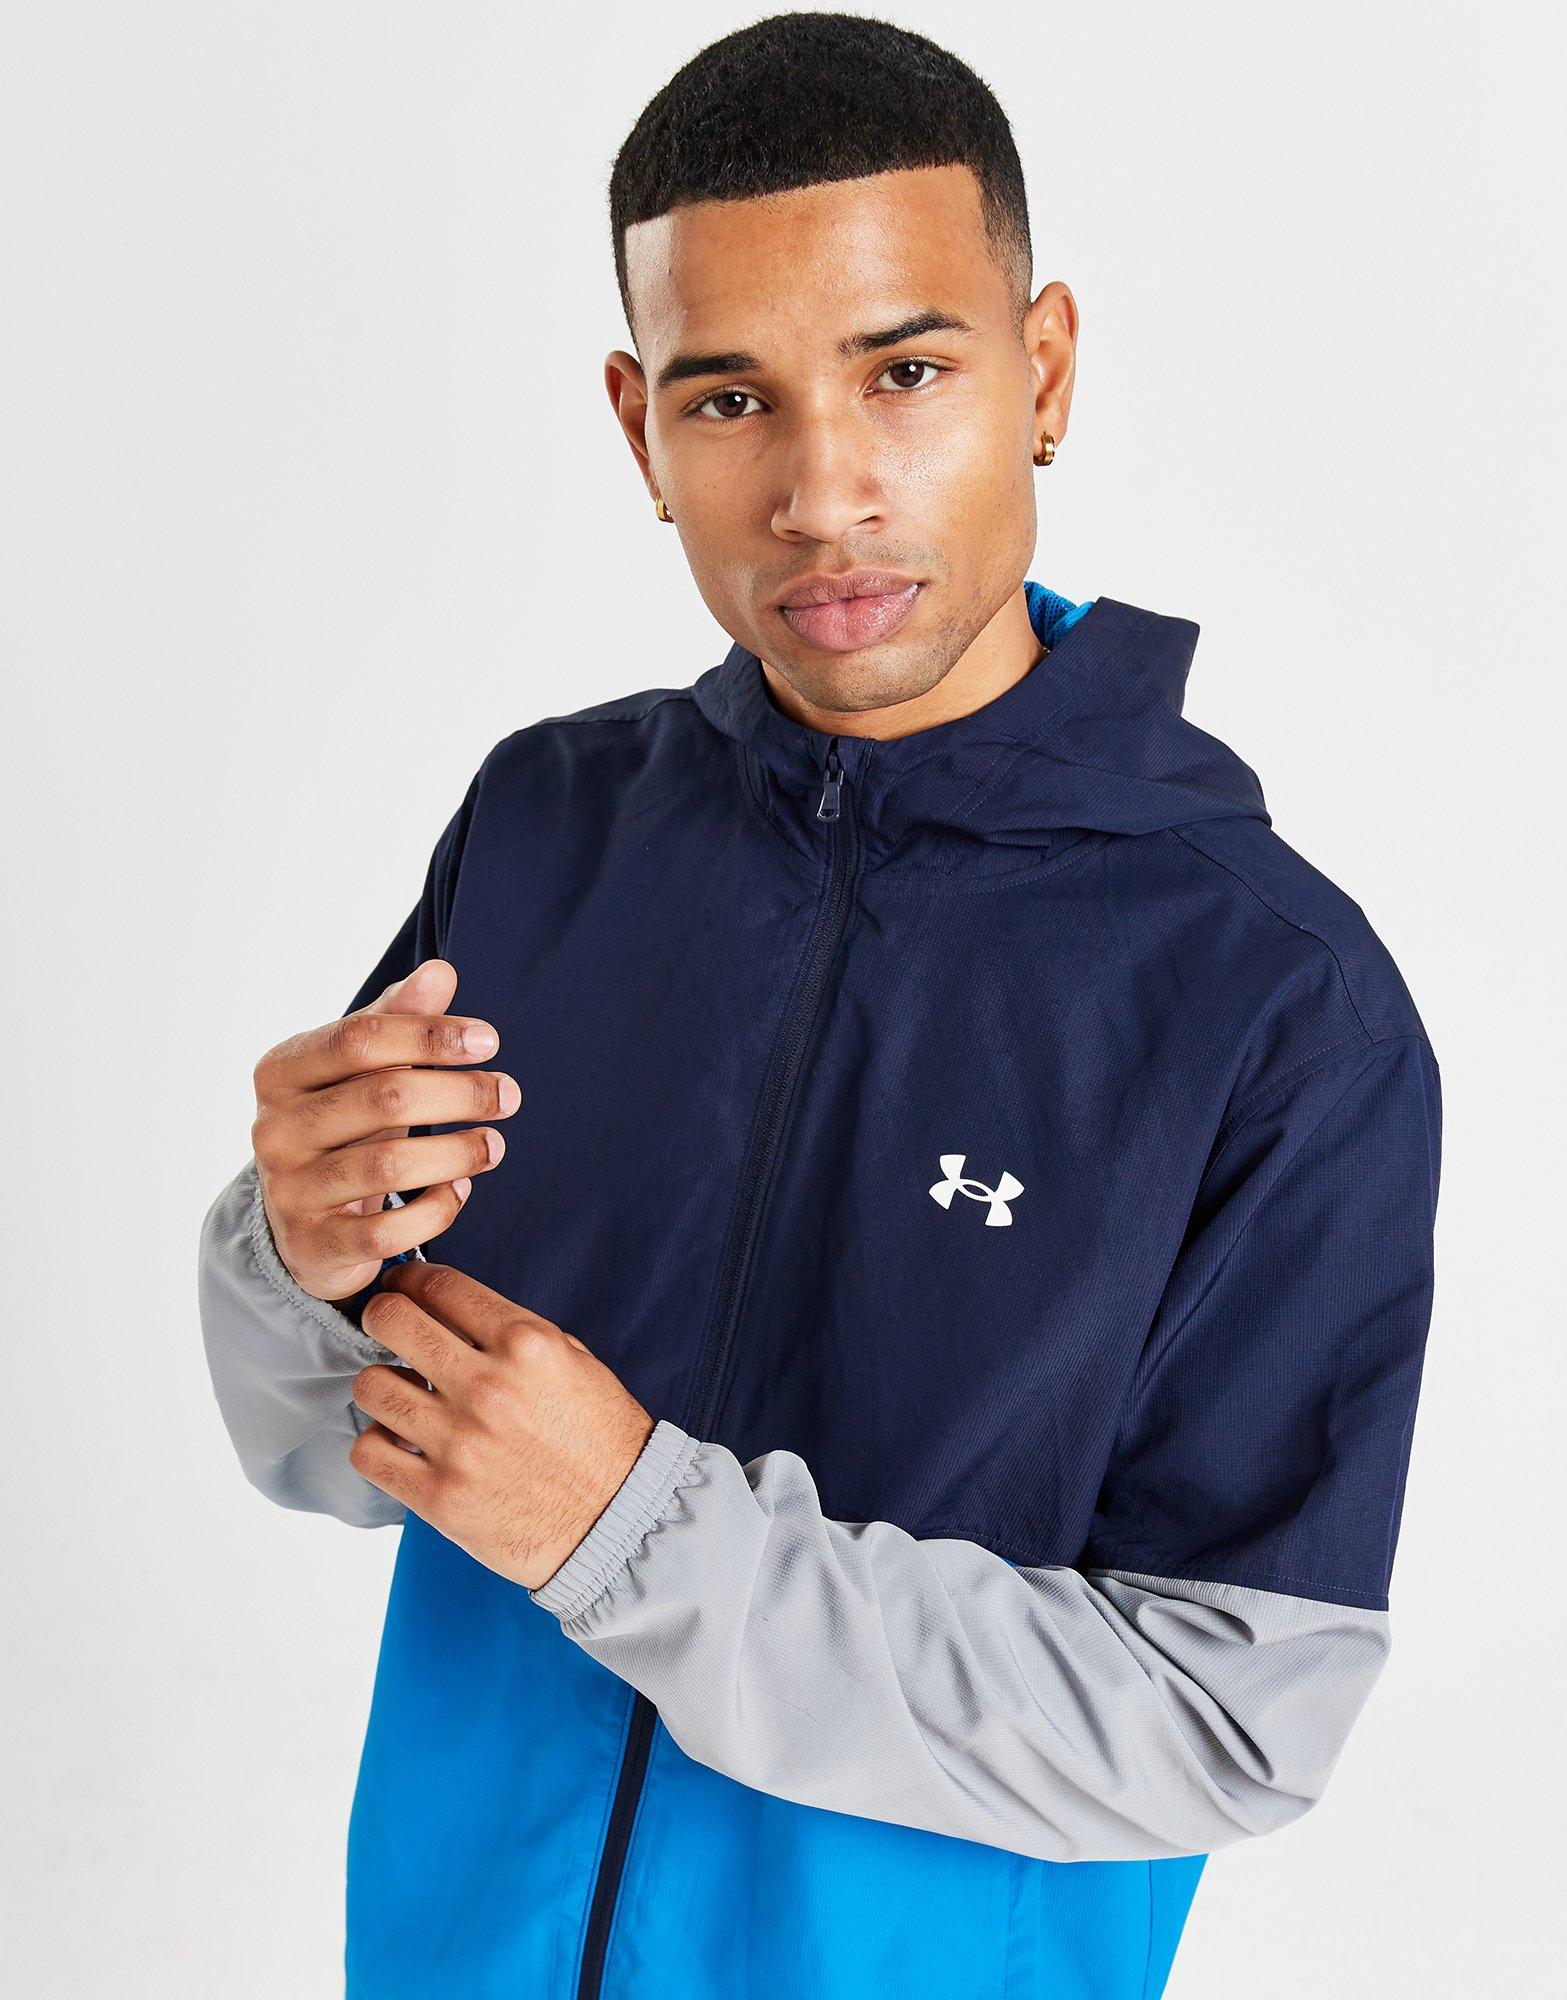 Under Armour Veste Coupe Vent Windrunner Homme